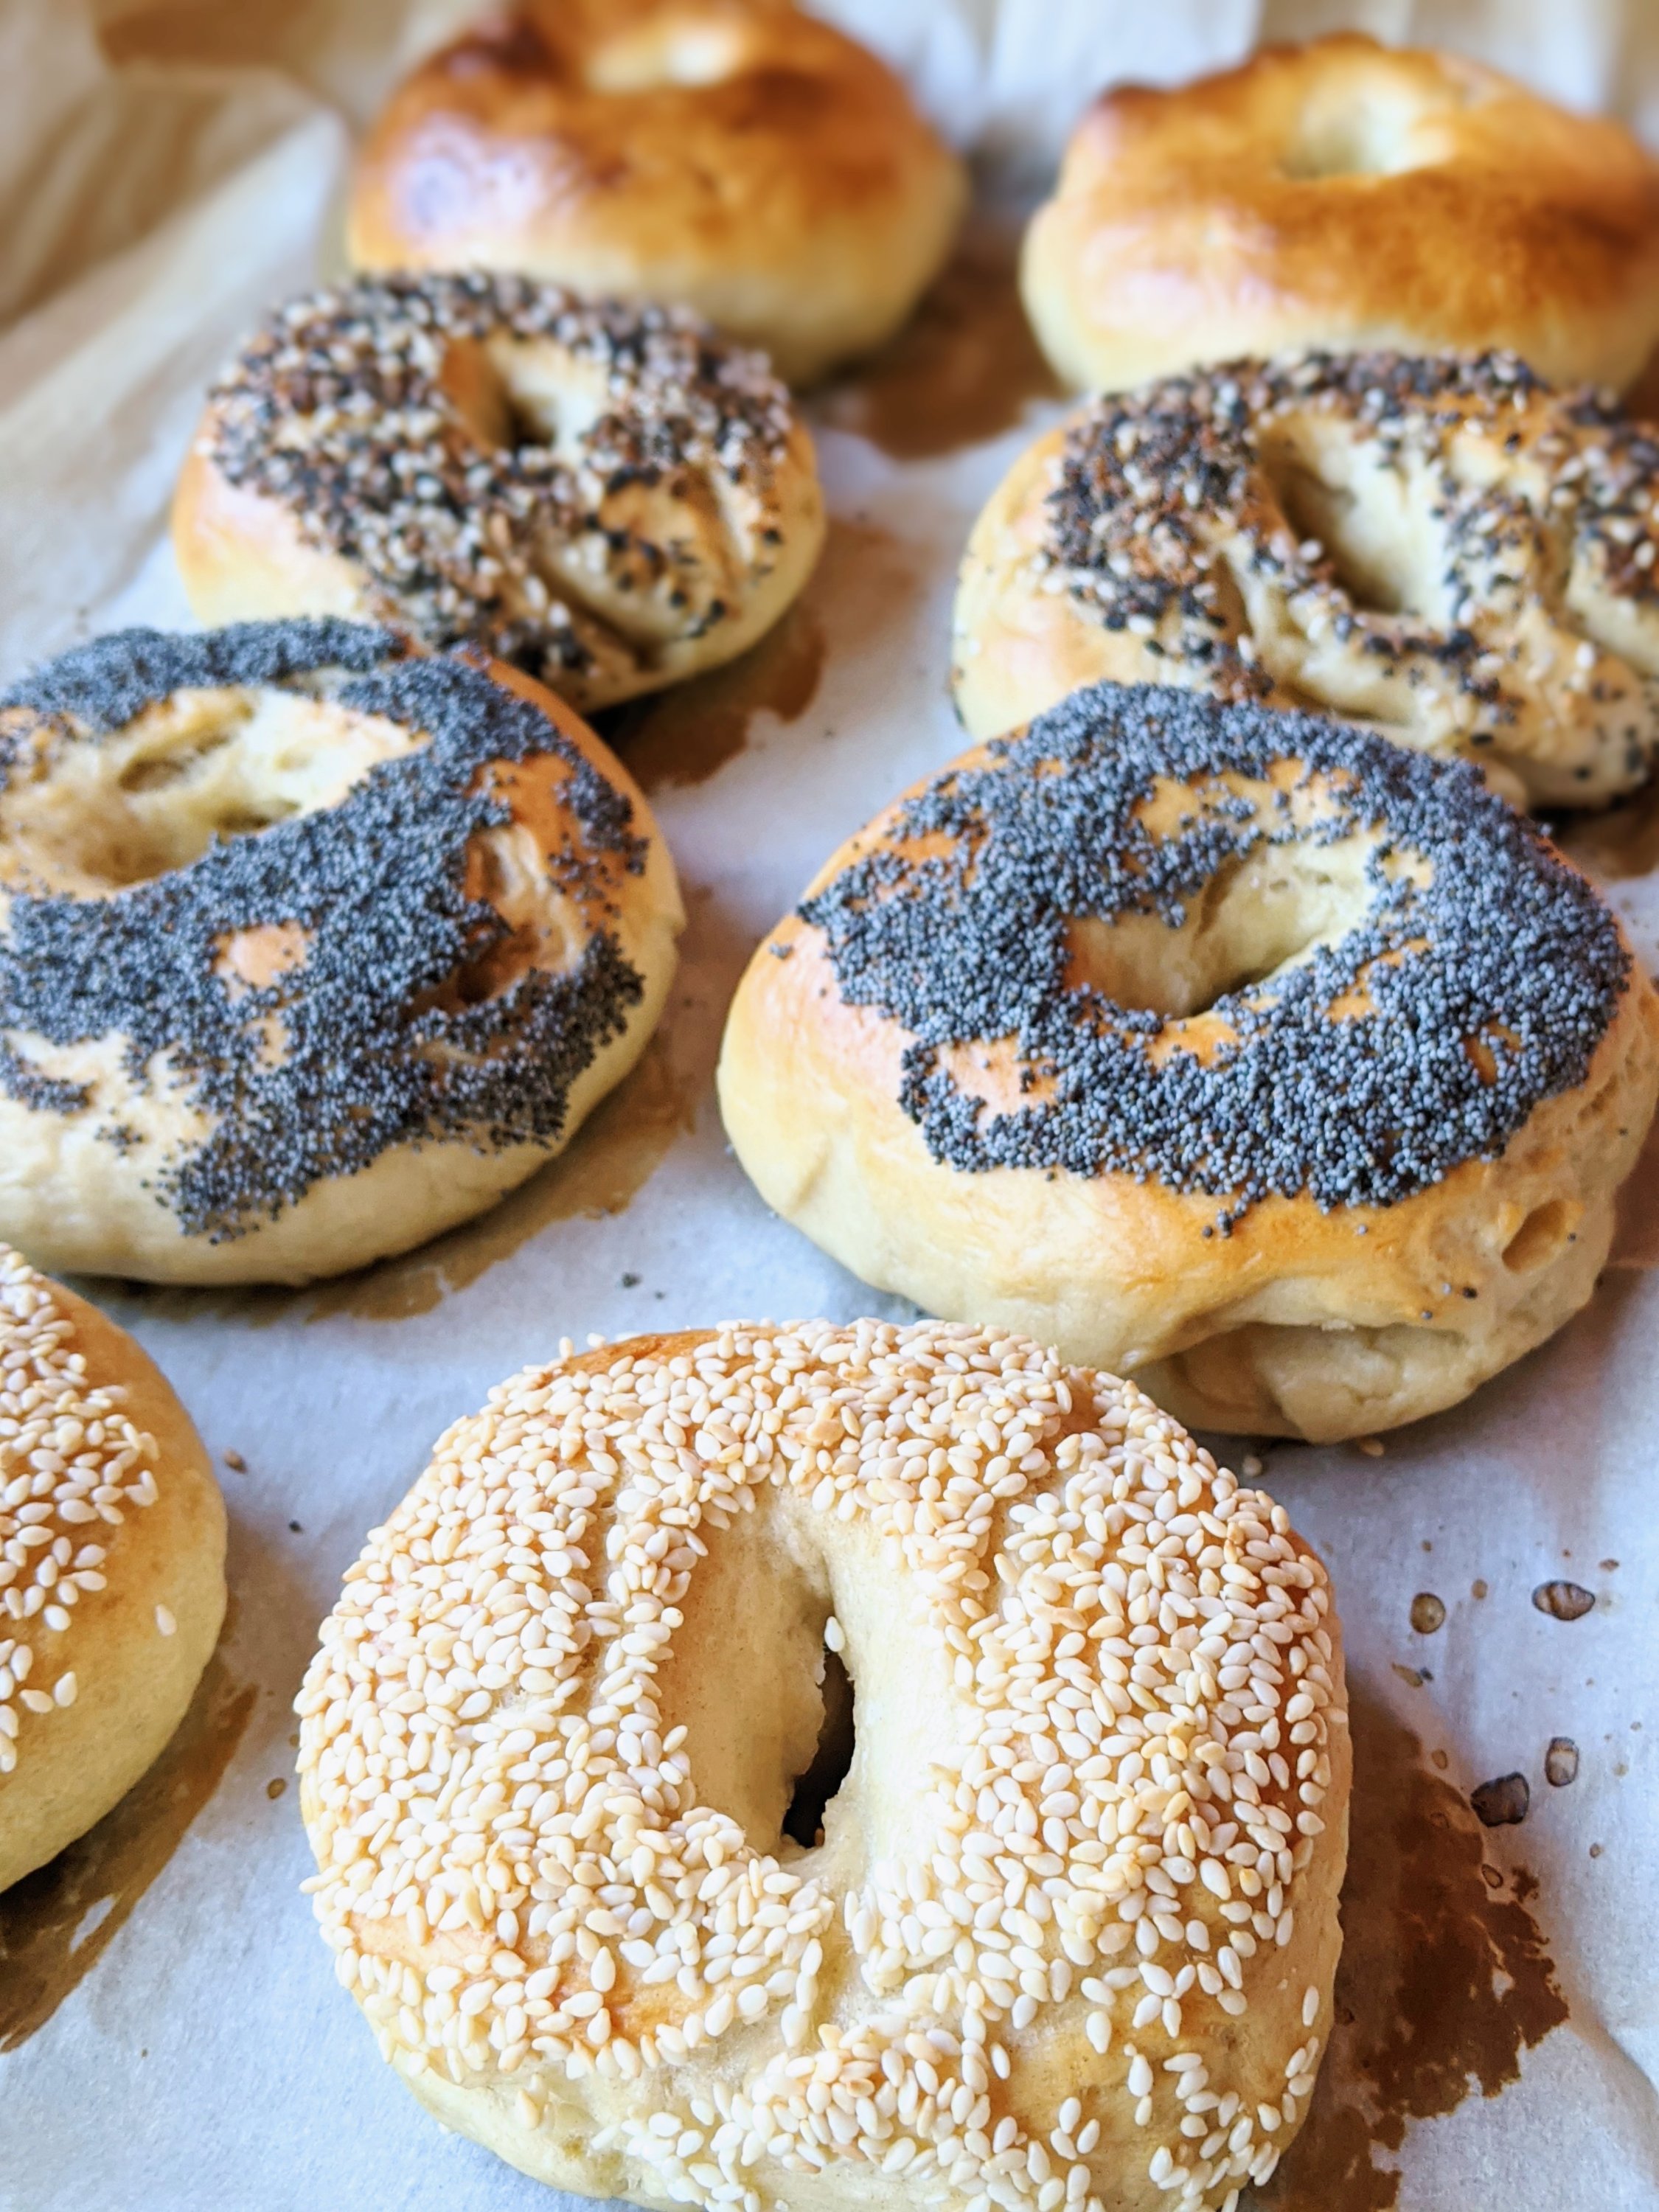 cheap breakfast ideas to make at home with pantry staple ingredients healthy homemade bagels filling breakfast on the cheap pennies flour